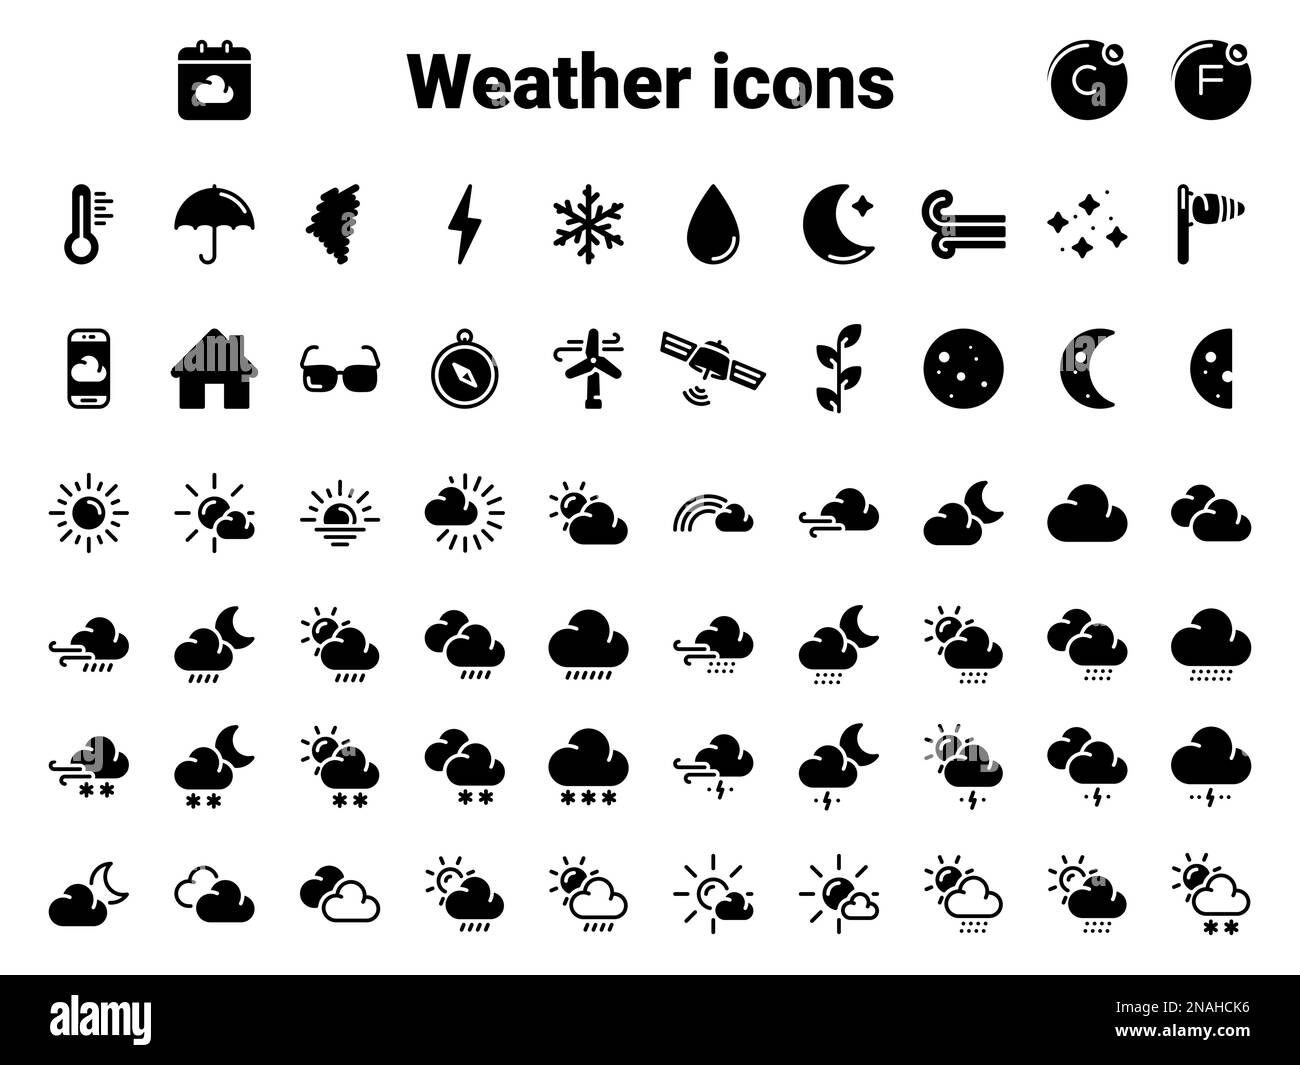 Simple vector icons. Flat illustration on a theme weather symbols and signs Stock Vector